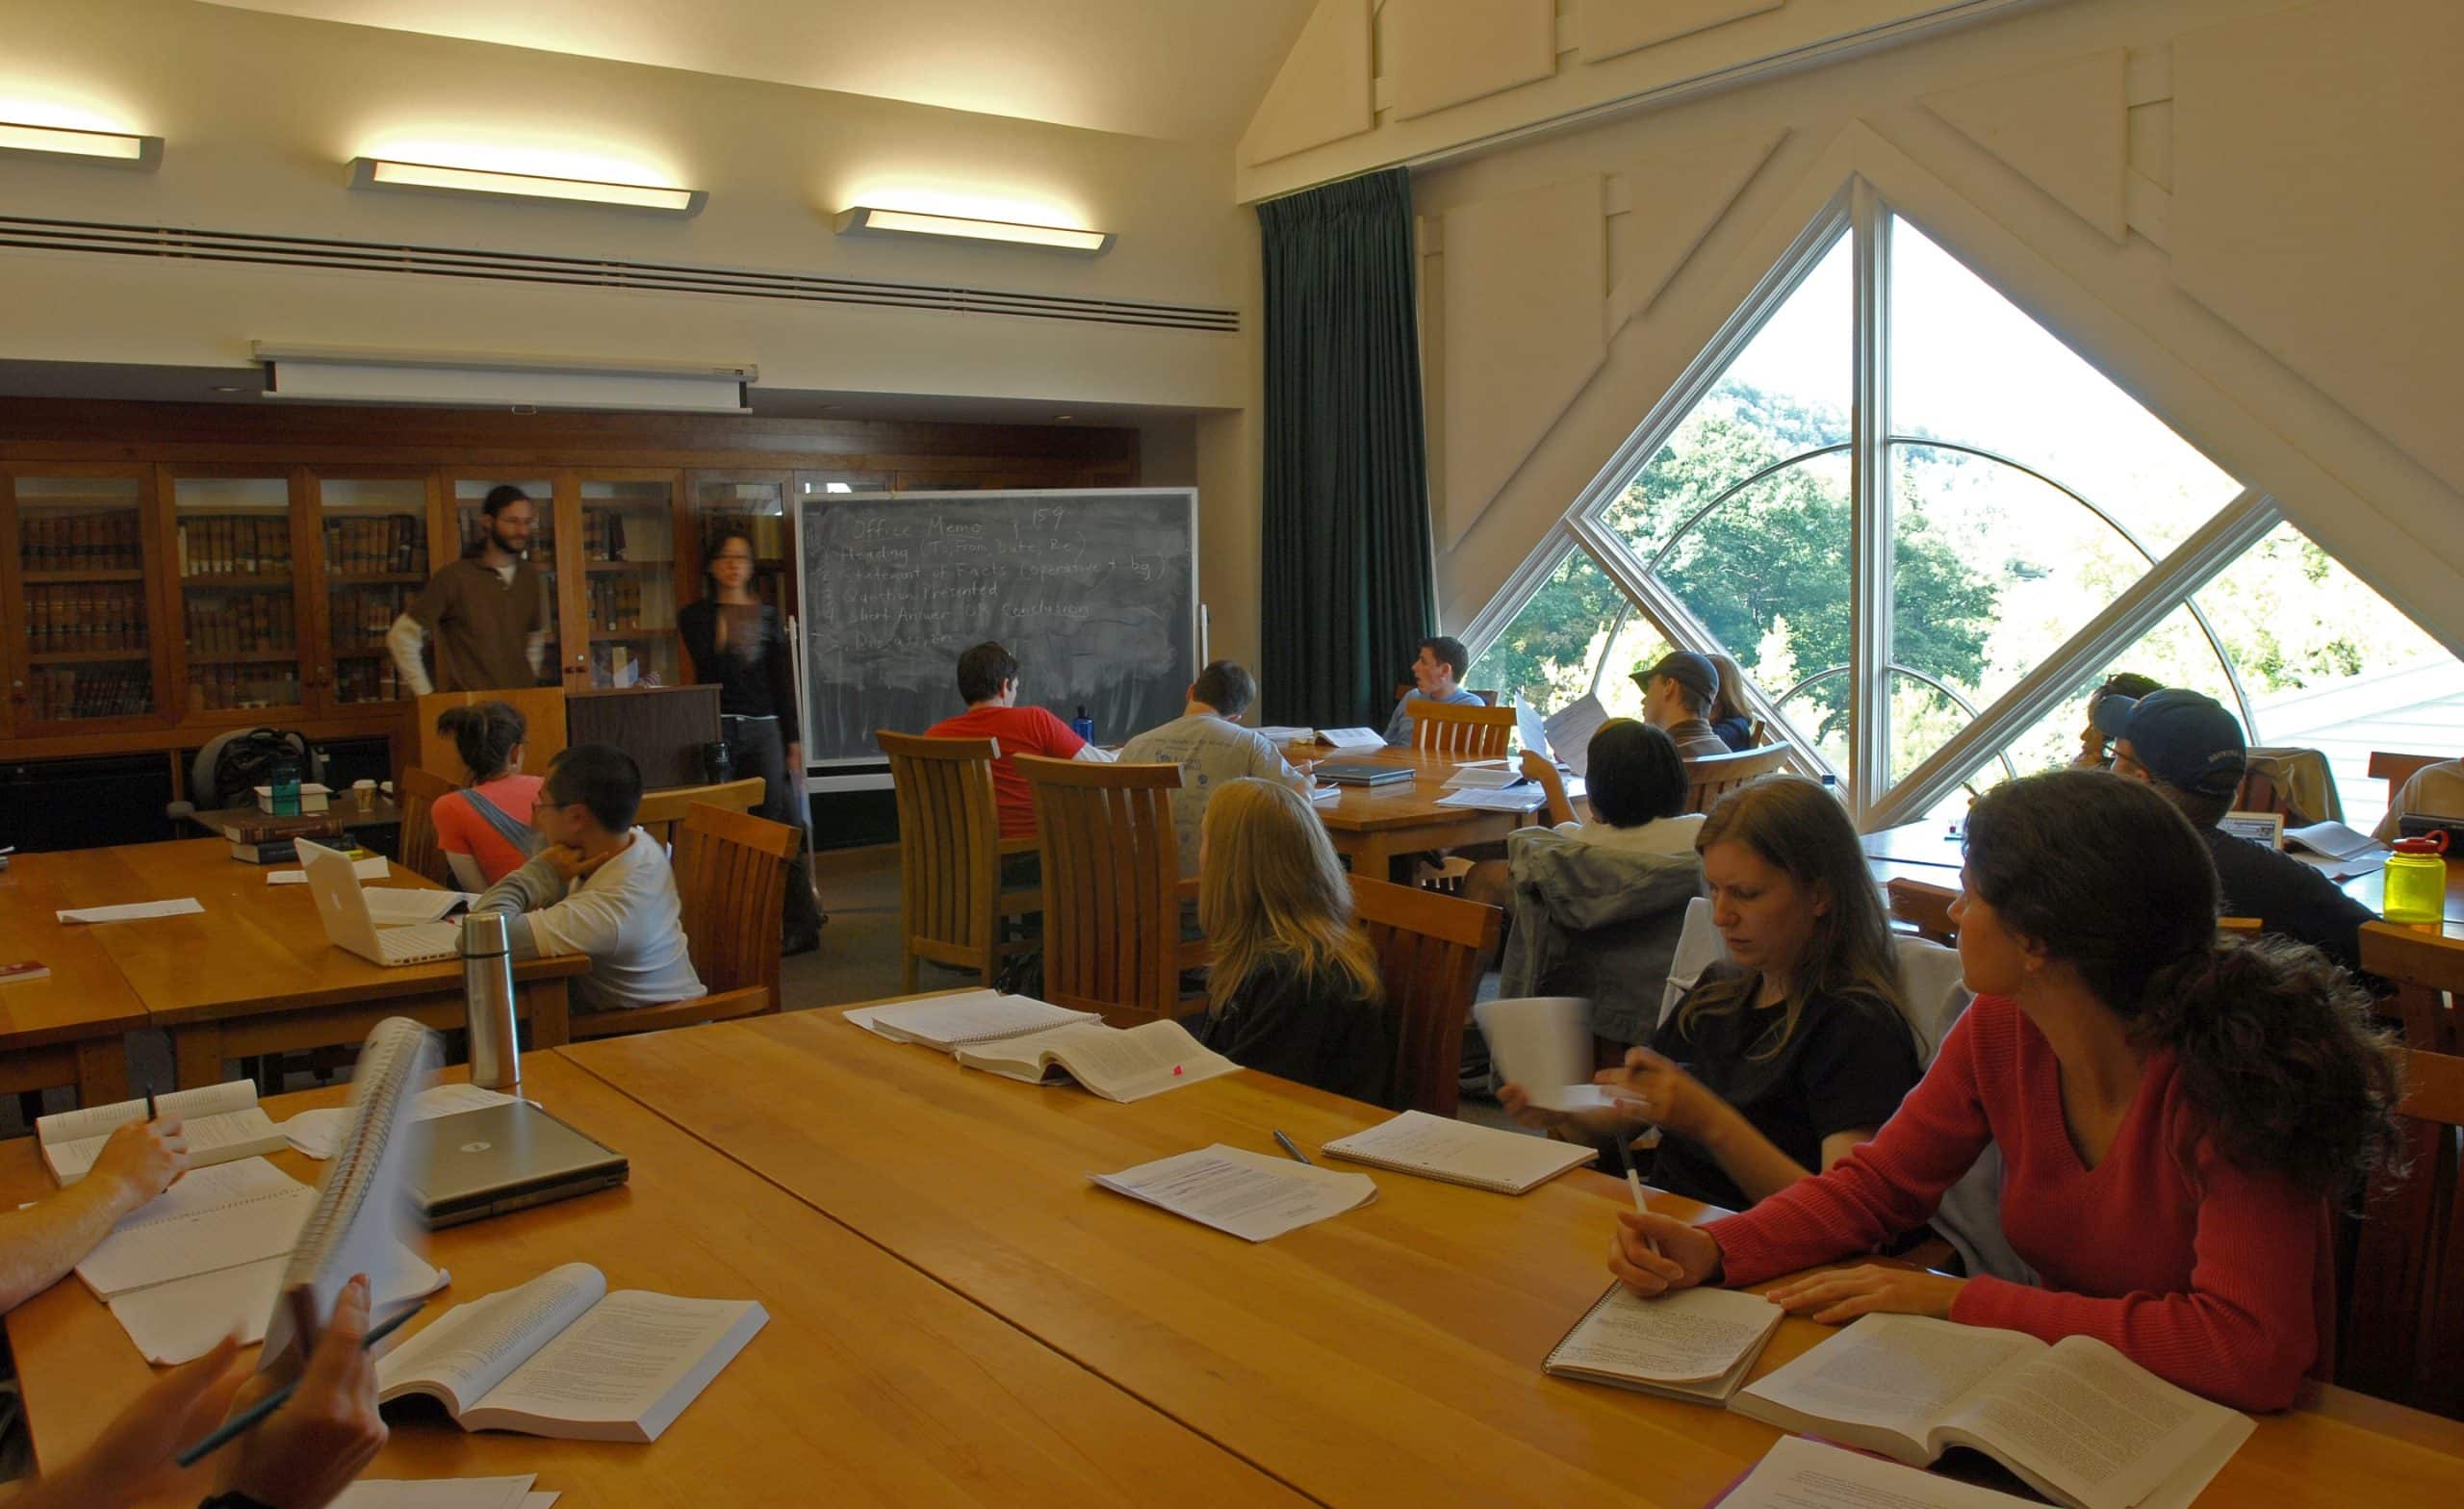 Students in a class at the Cornell Library.